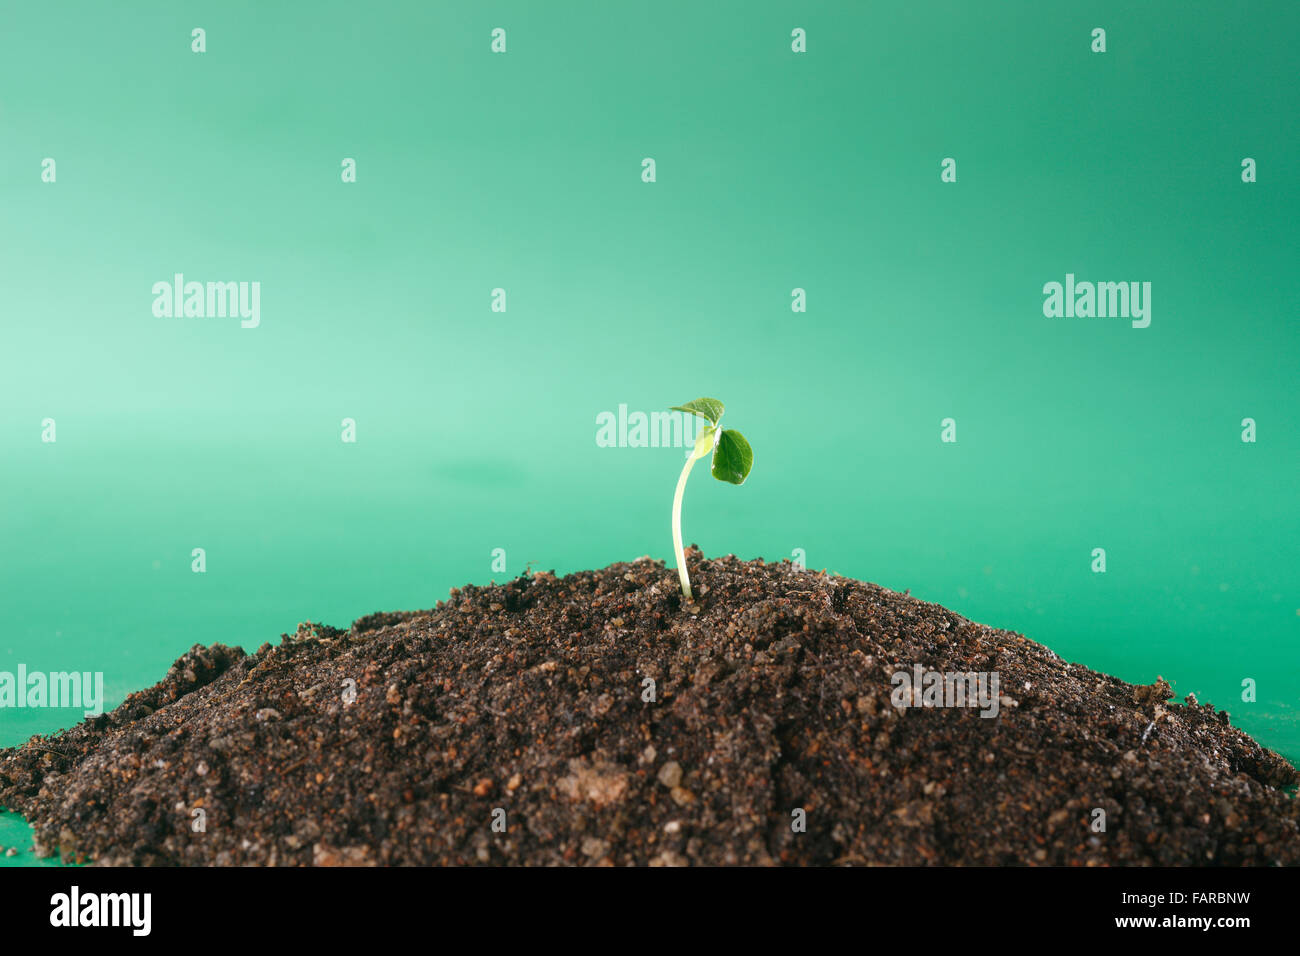 stock image of the small plant growing Stock Photo